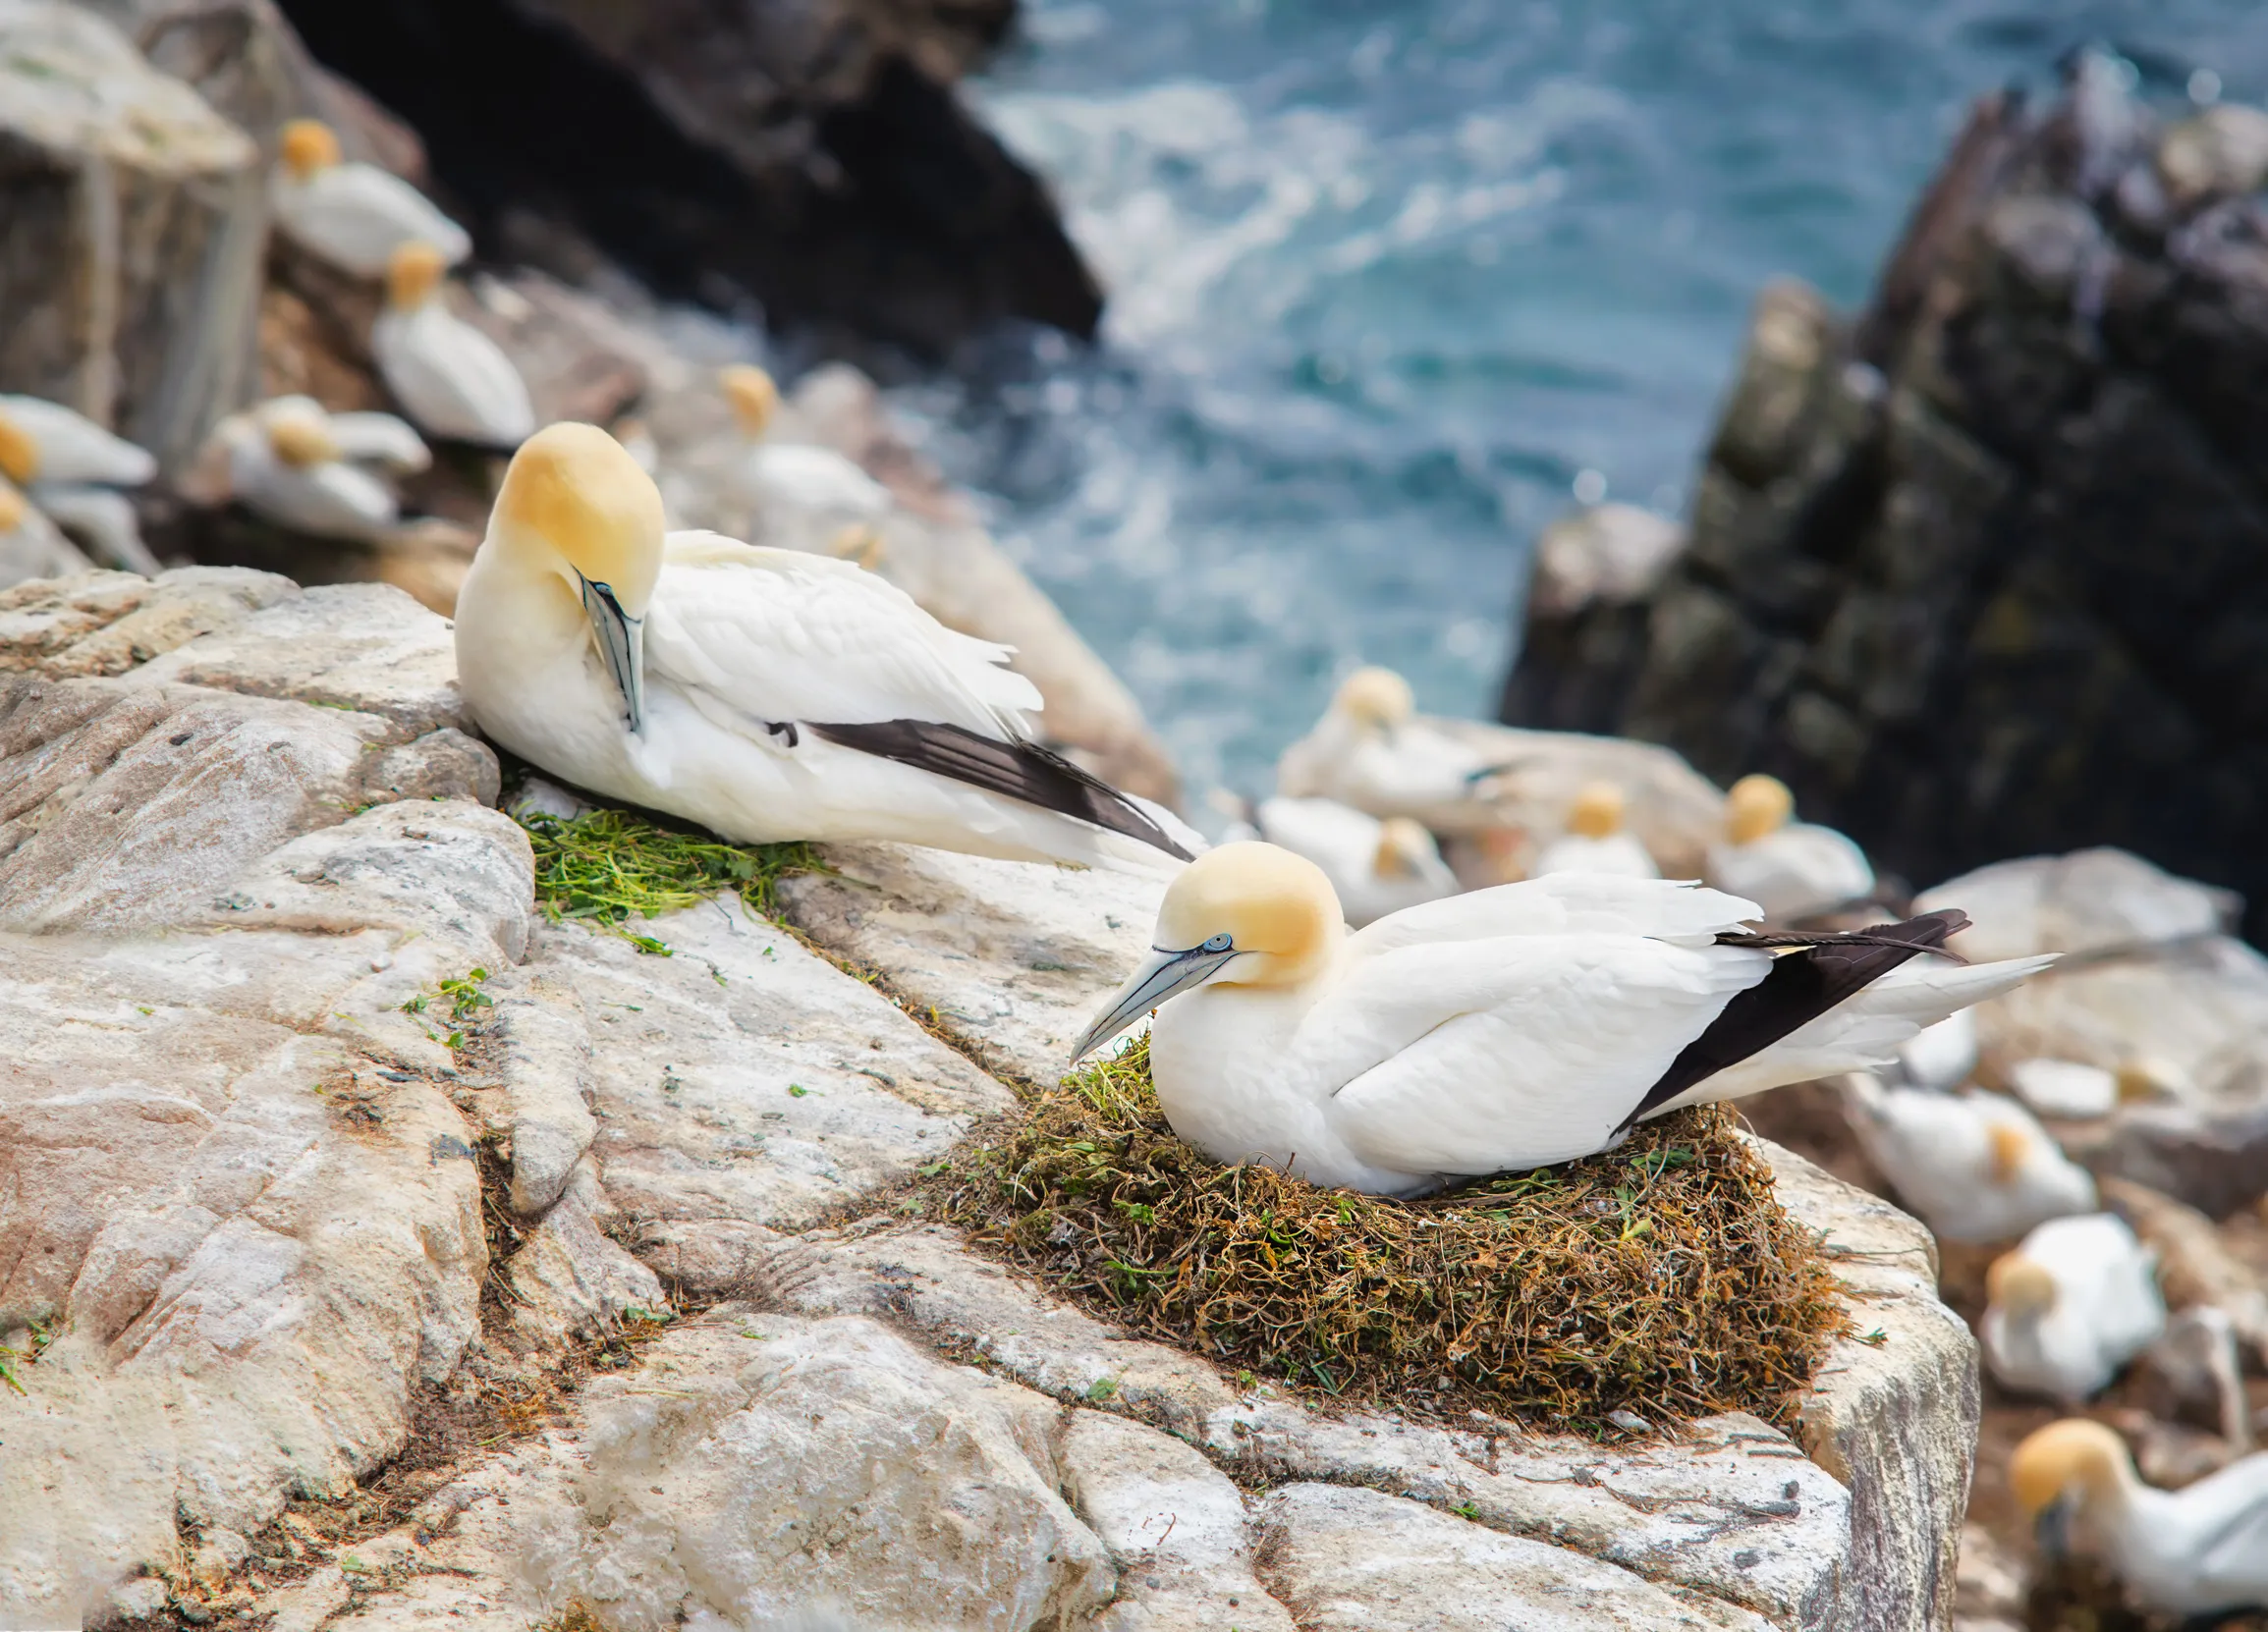 Gannets on a nest at the edge of a cliff.